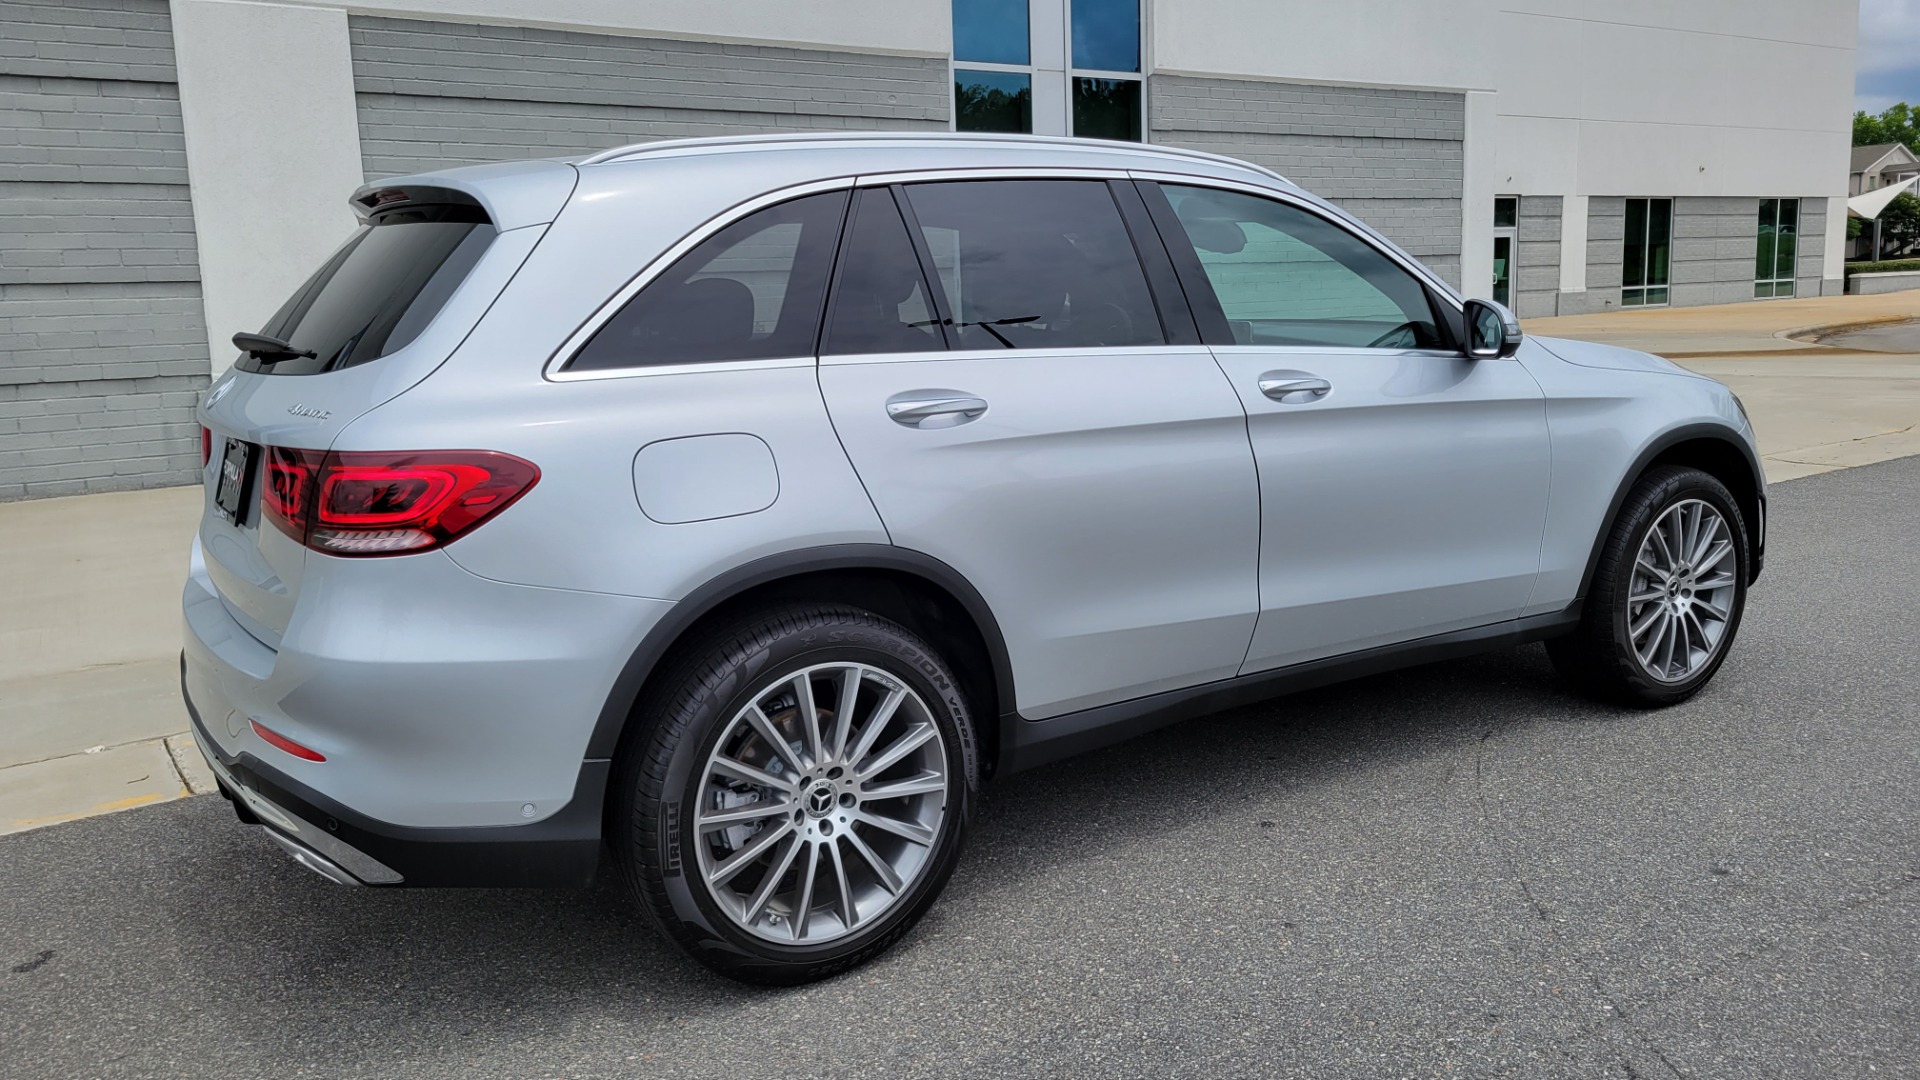 Used 2020 Mercedes-Benz GLC 300 PREMIUM / MULTIMEDIA / PARK ASST / LIGHTING / PANO-ROOF / CAMERA for sale $48,999 at Formula Imports in Charlotte NC 28227 8